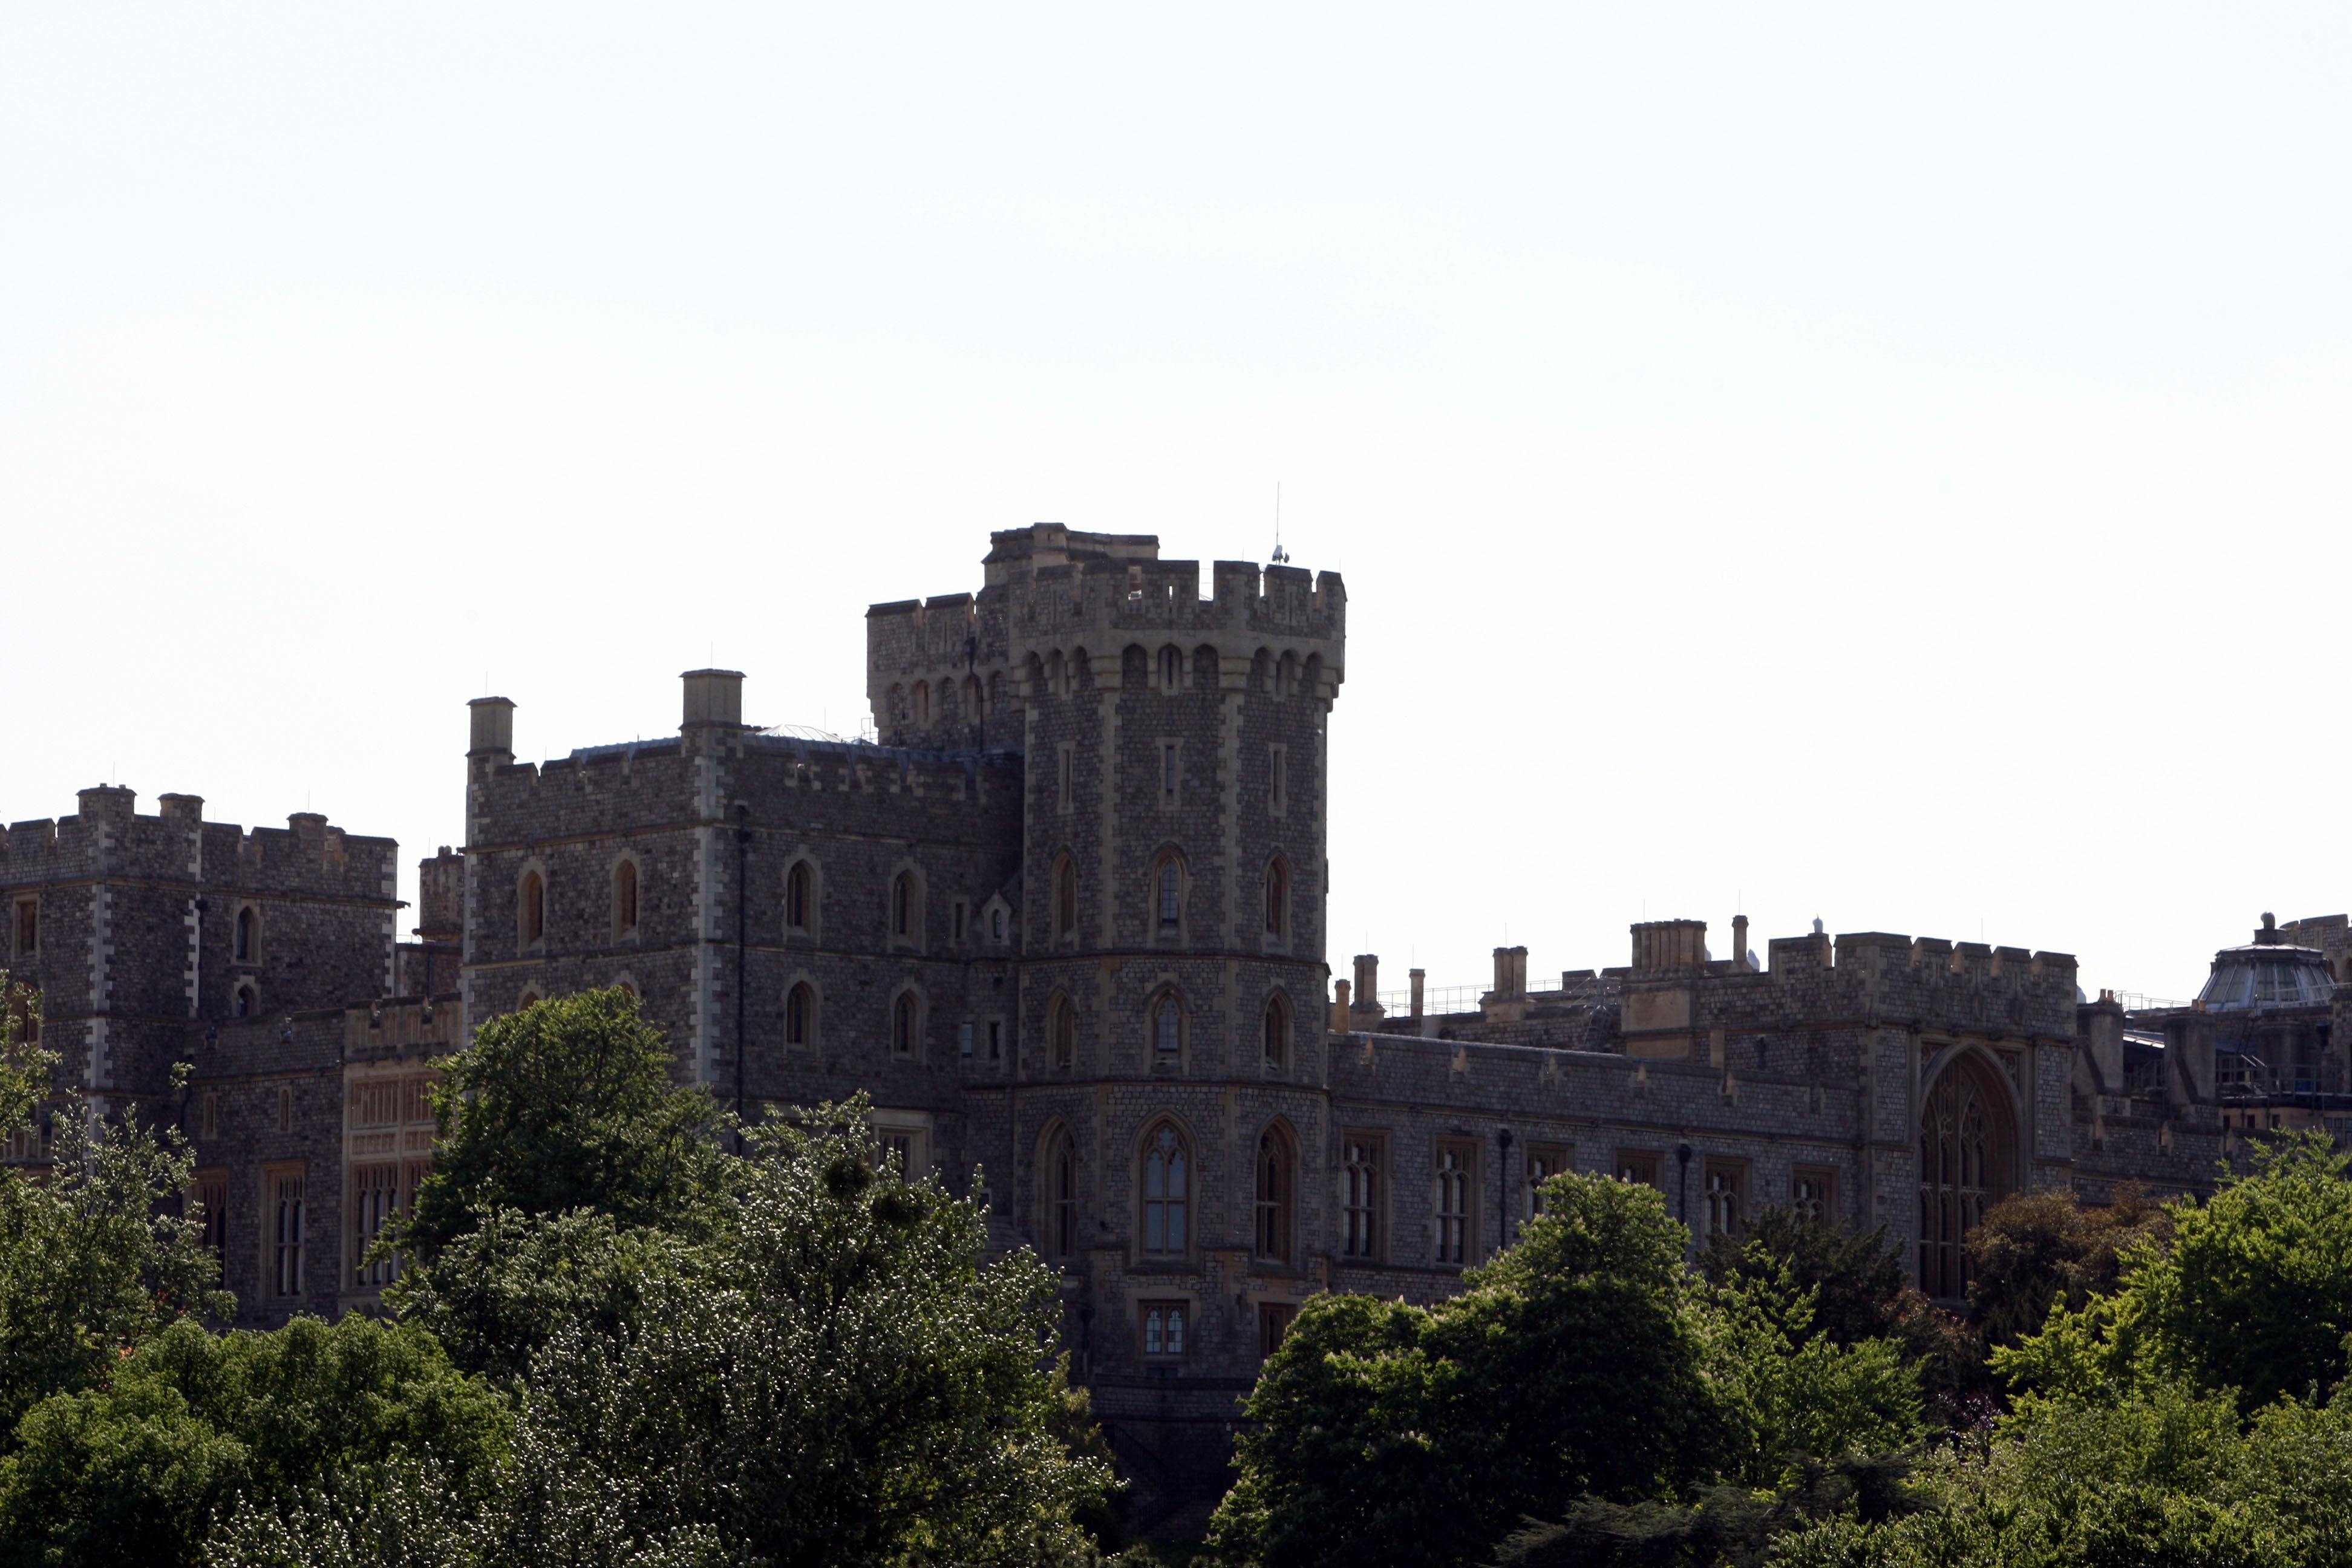 A 19-year-old man was arrested at Windsor Castle on Christmas Day while in possession of a crossbow (Steve Parsons/PA)